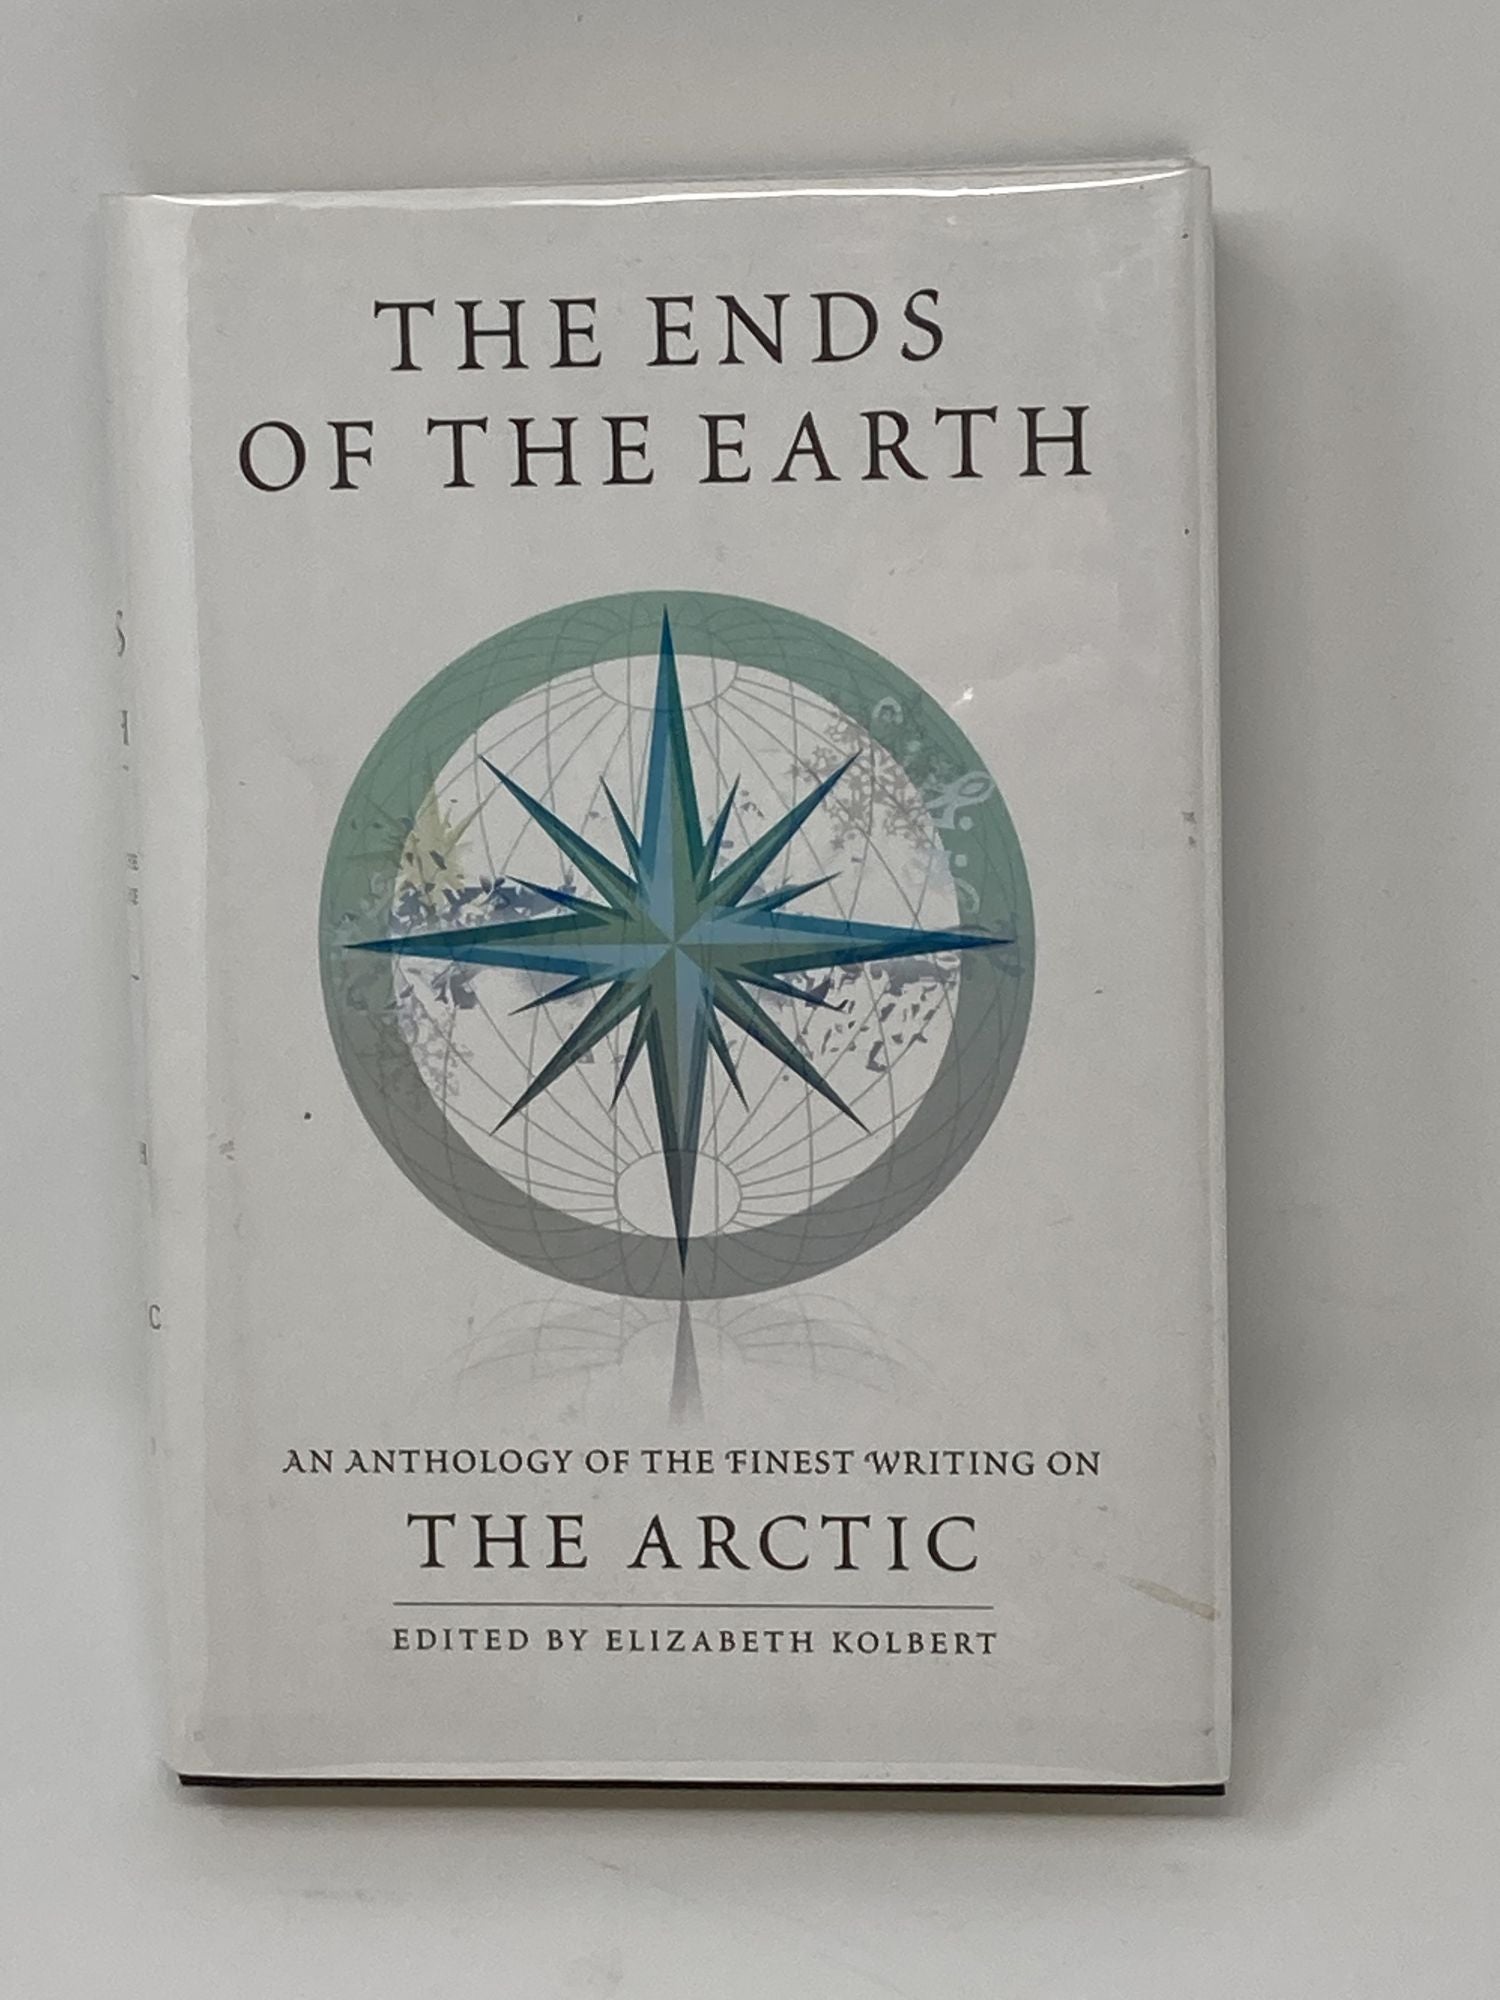 Spufford, Francis, and Elizabeth Kolbert (editors) - The Ends of the Earth: The Antarctic a N D the Ends of the Earth: The Arctic; an Anthology of the Finest Writing on the Antarctic, and an Anthology of the Finest Writing on the Arctic